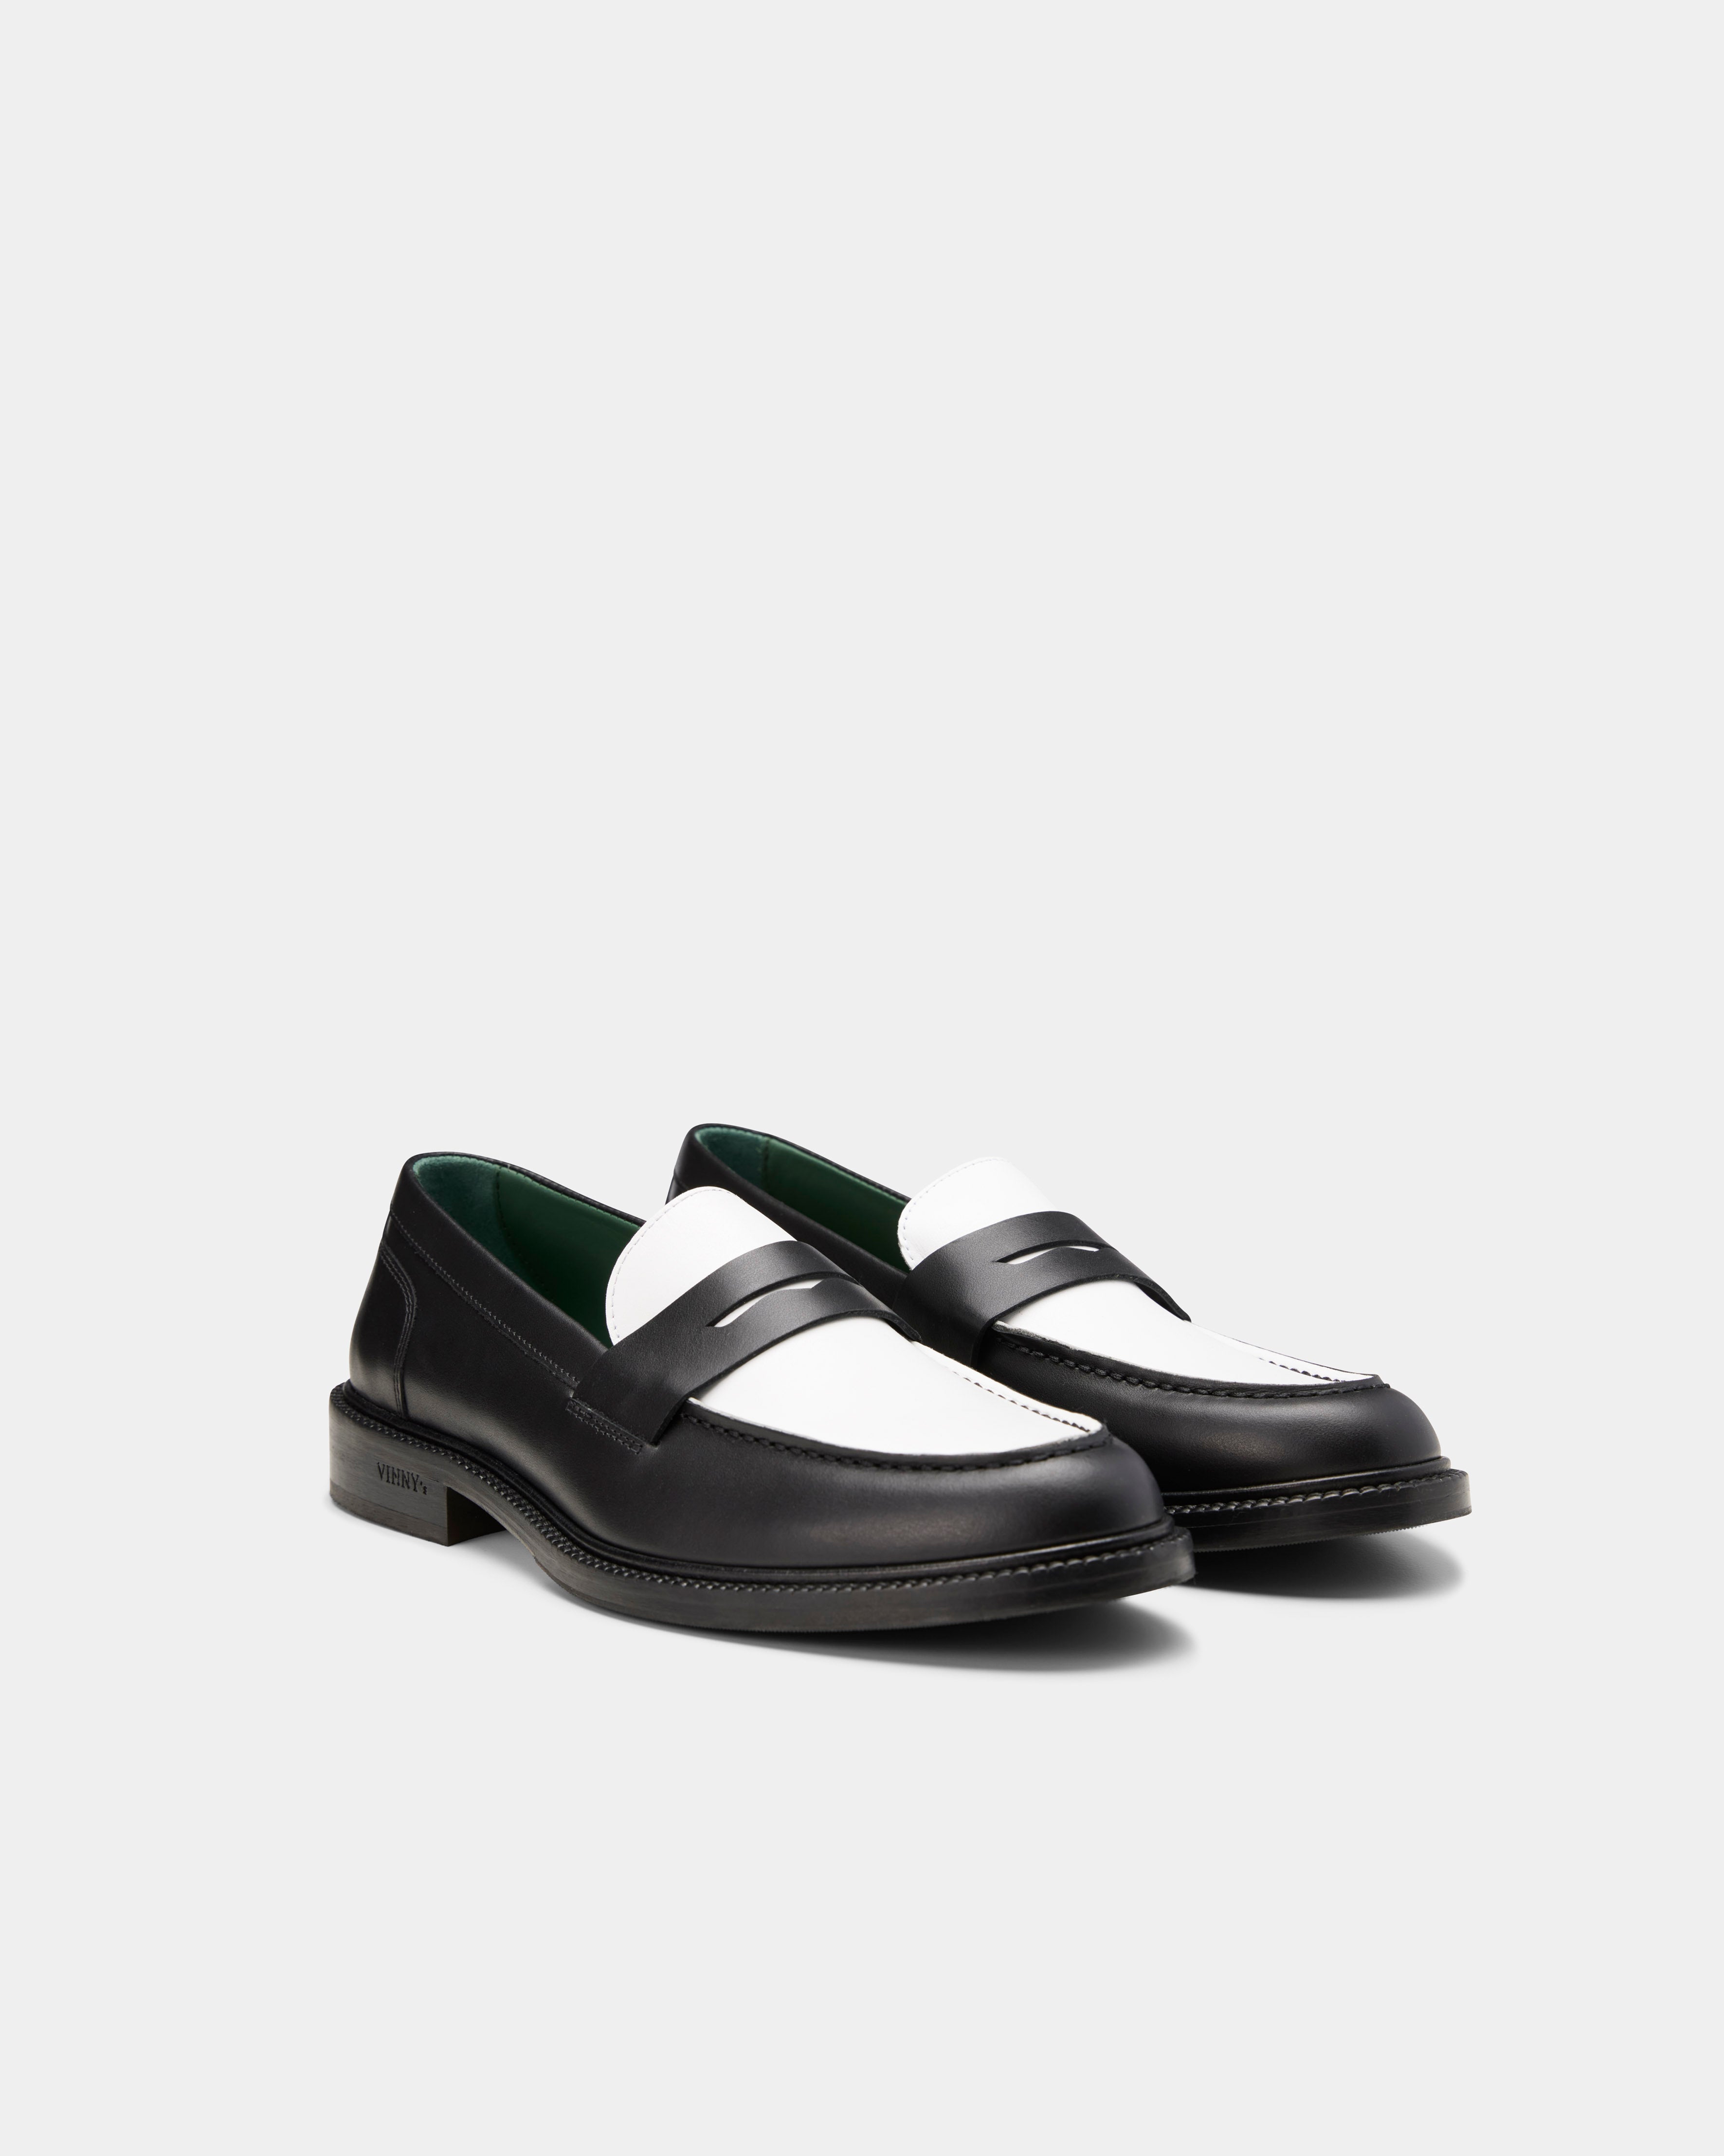 women's black and white loafer